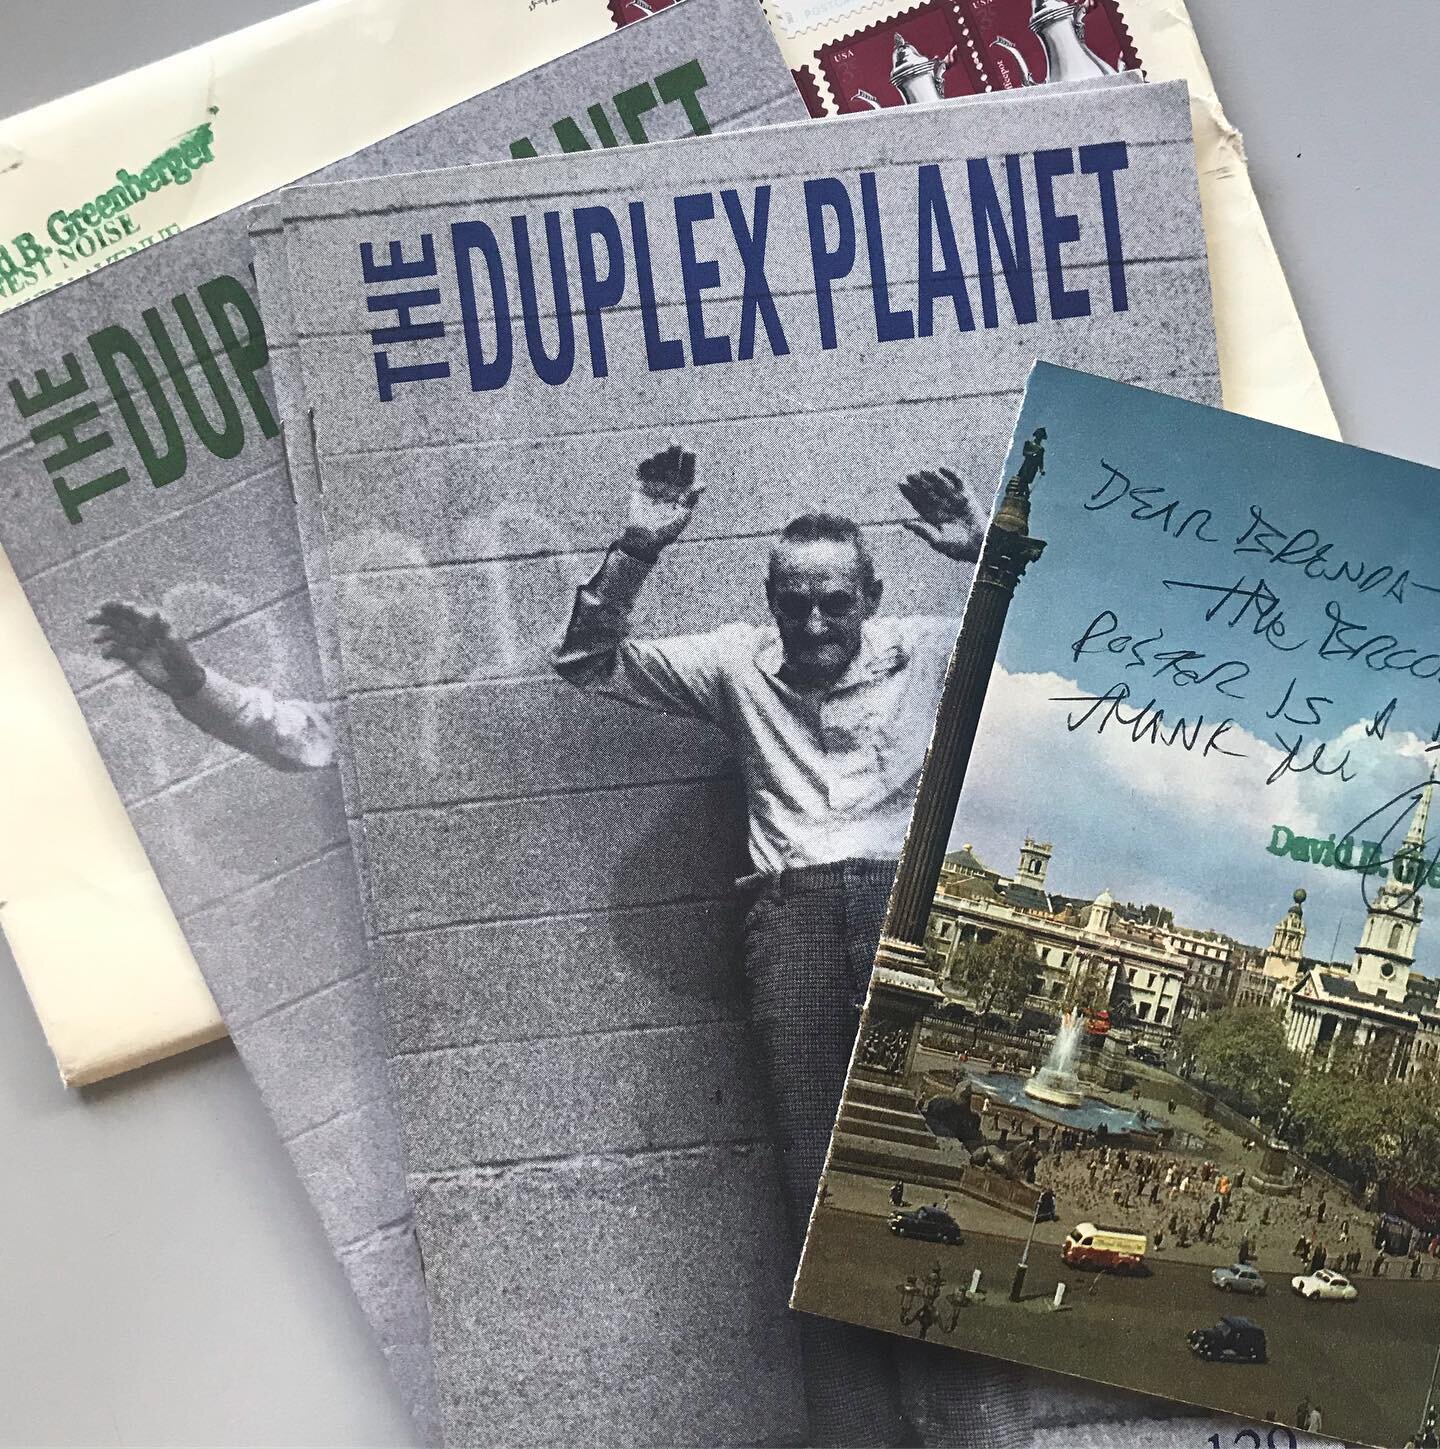 Trying to be super chill about today&rsquo;s mail...just a personal note and some original Duplex Planet zines from David Greenberger himself! (Squee!) #beyondtheduplexplanet